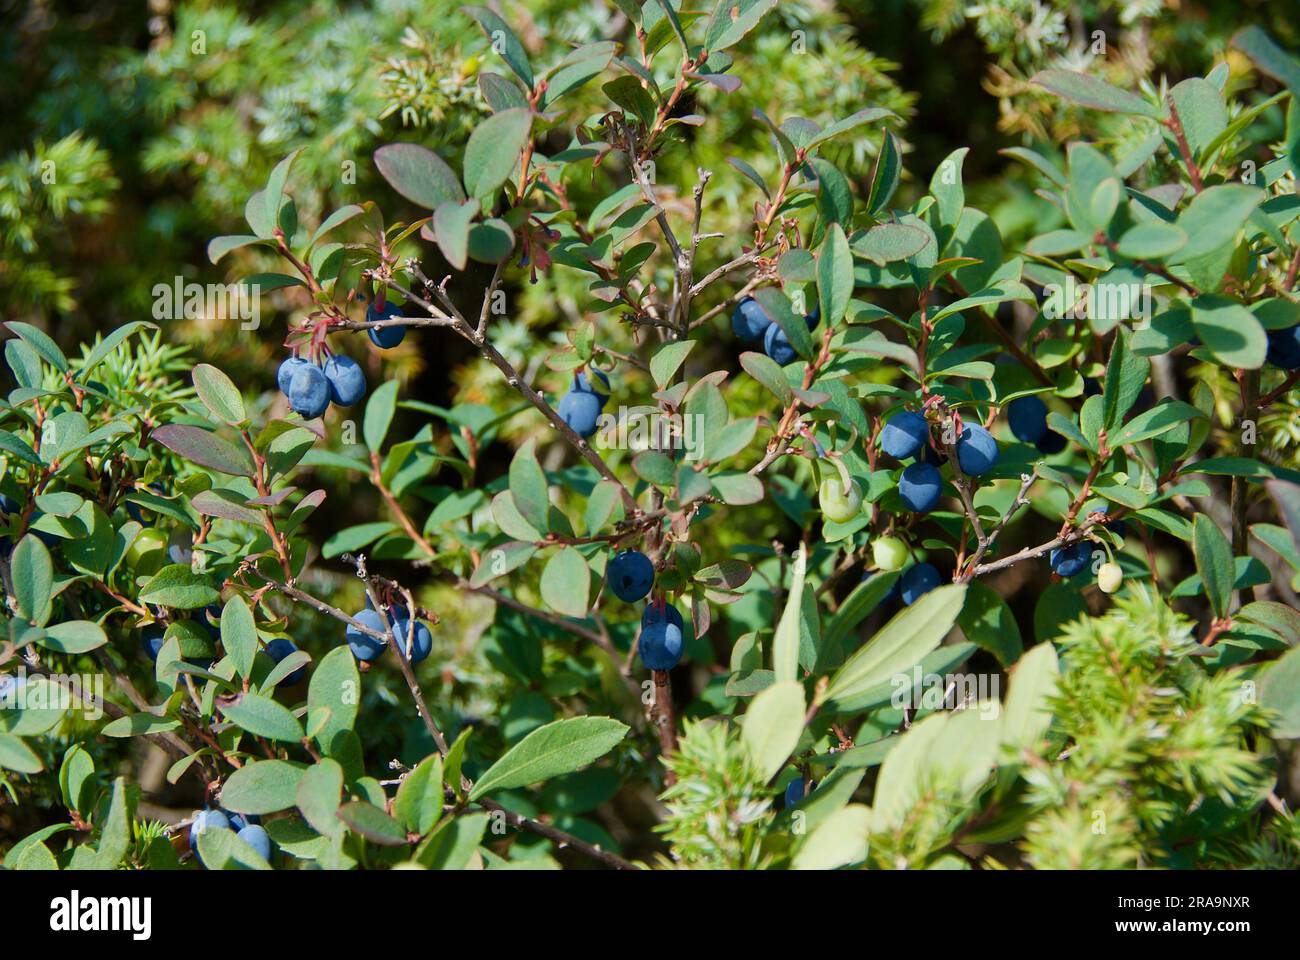 Forest landscape with bog whortleberry plants and blue edible berries in summer. Stock Photo